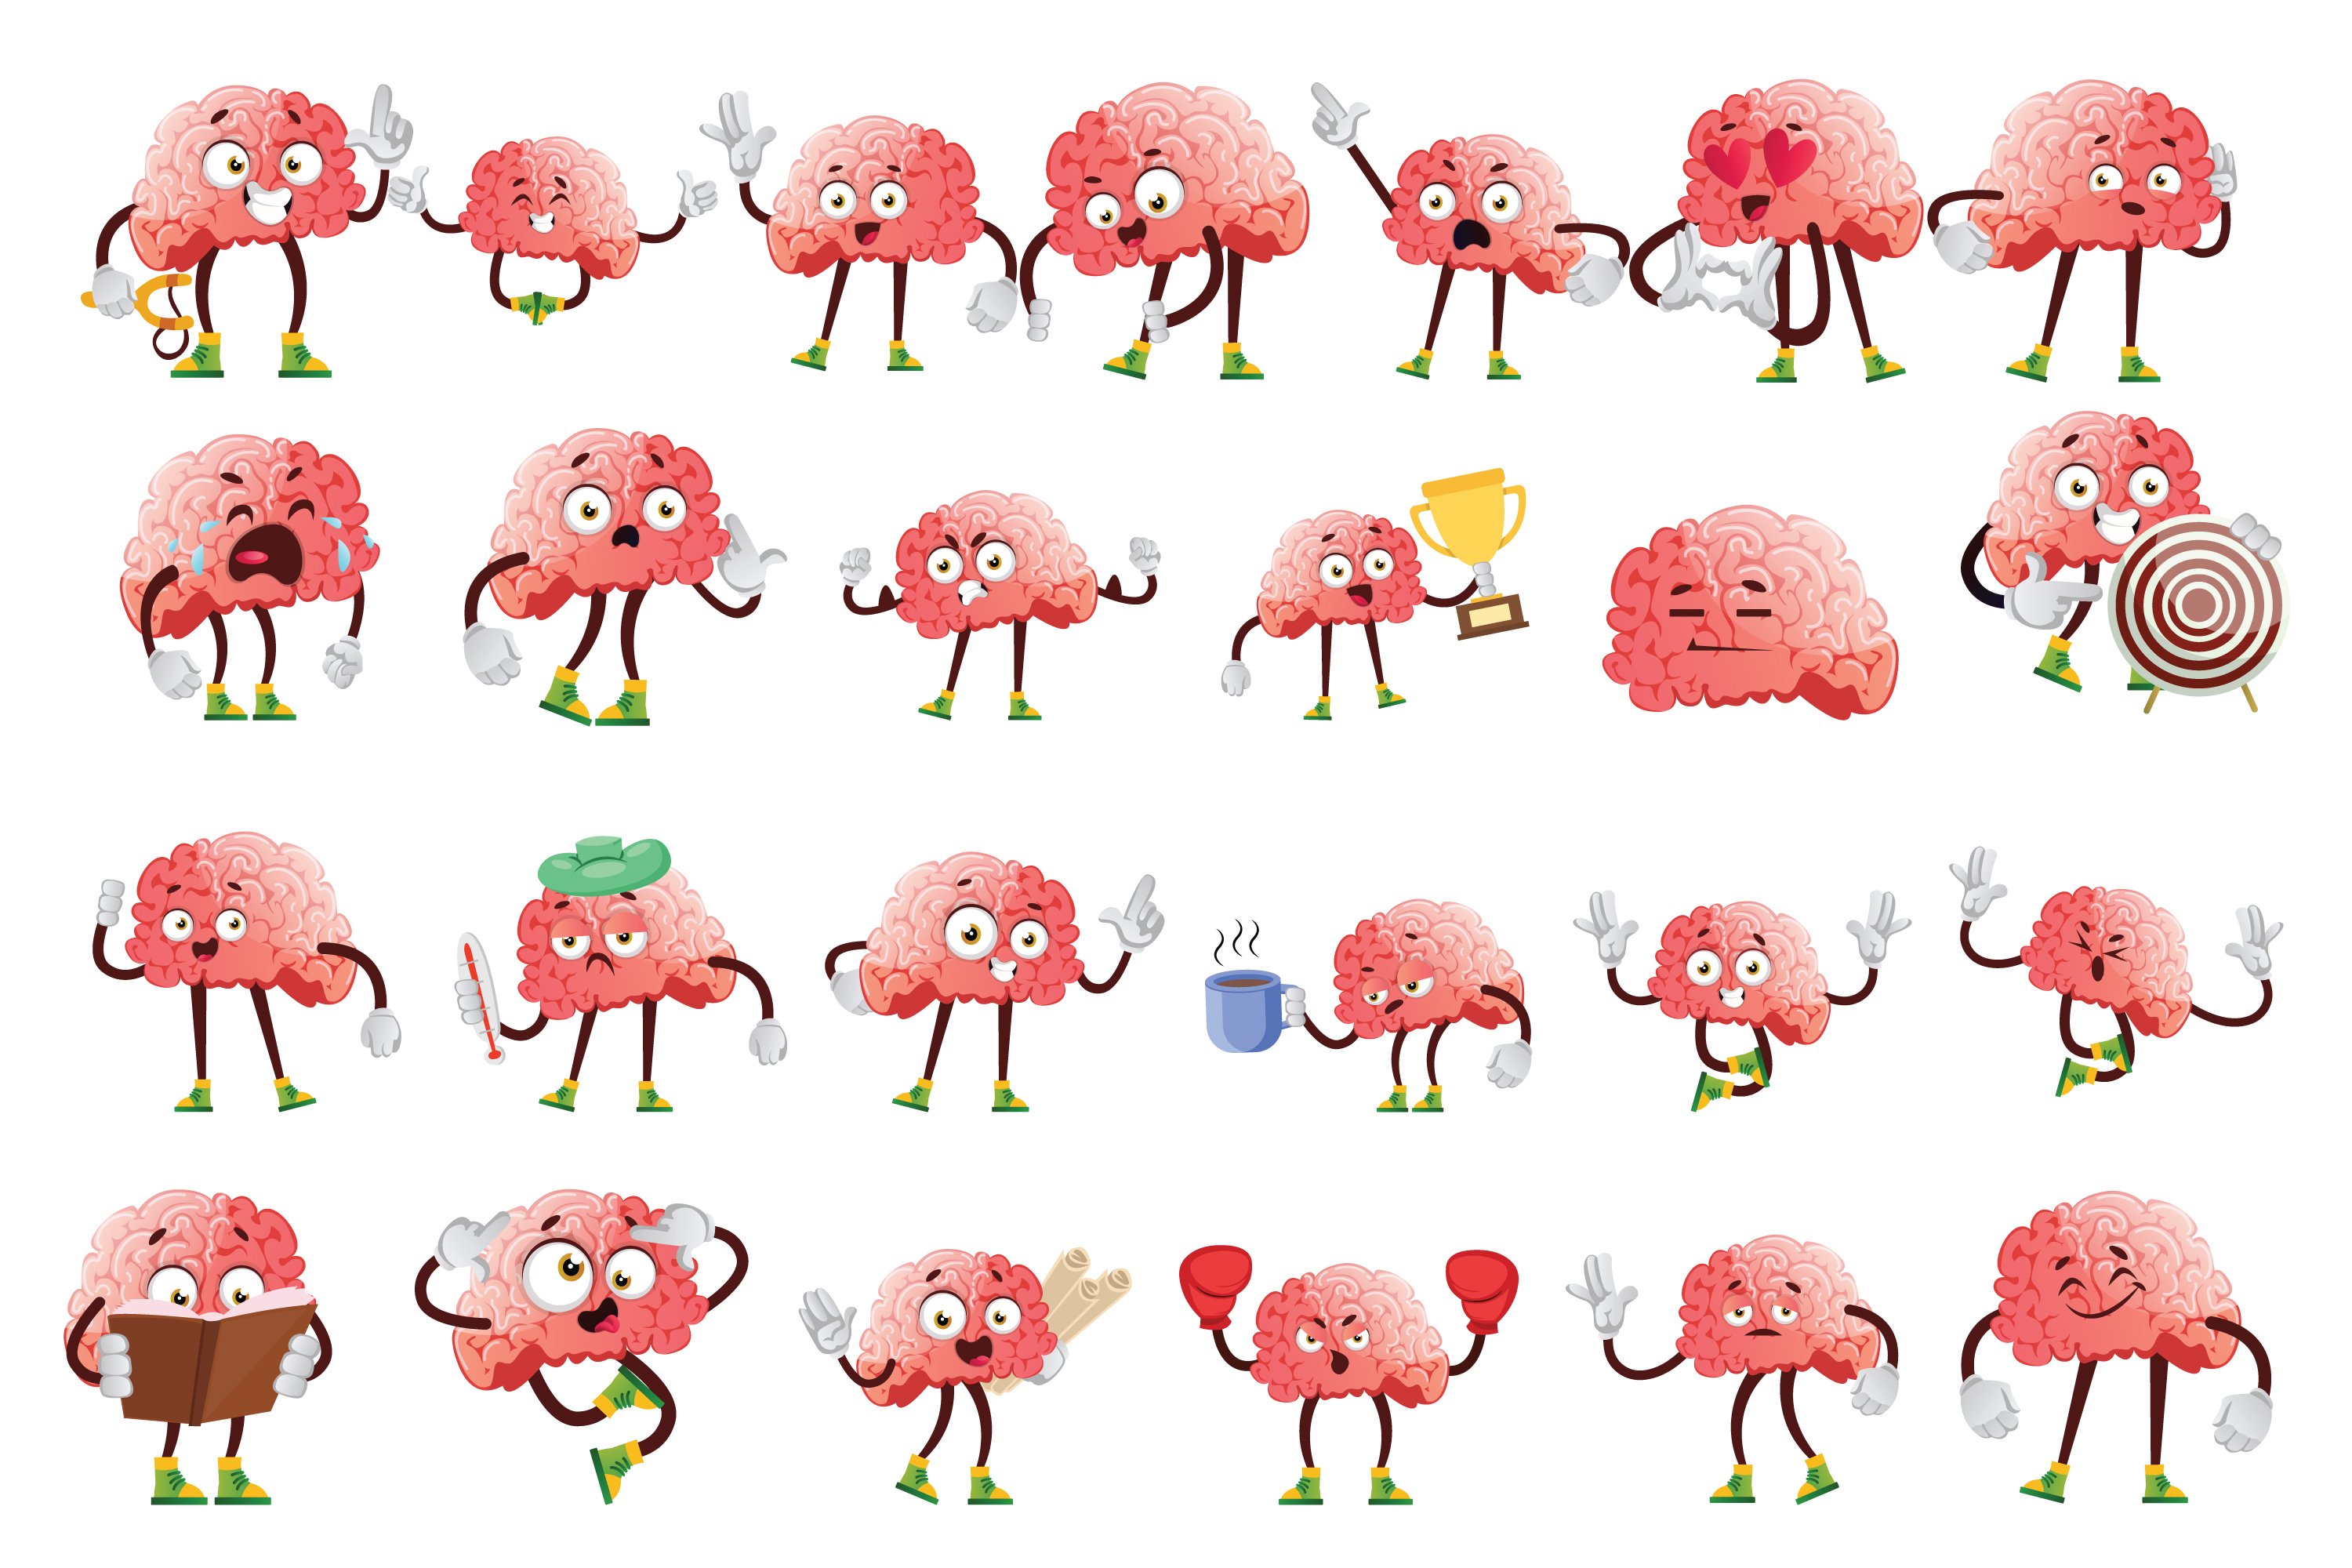 The brain in different positions with a muzzle.